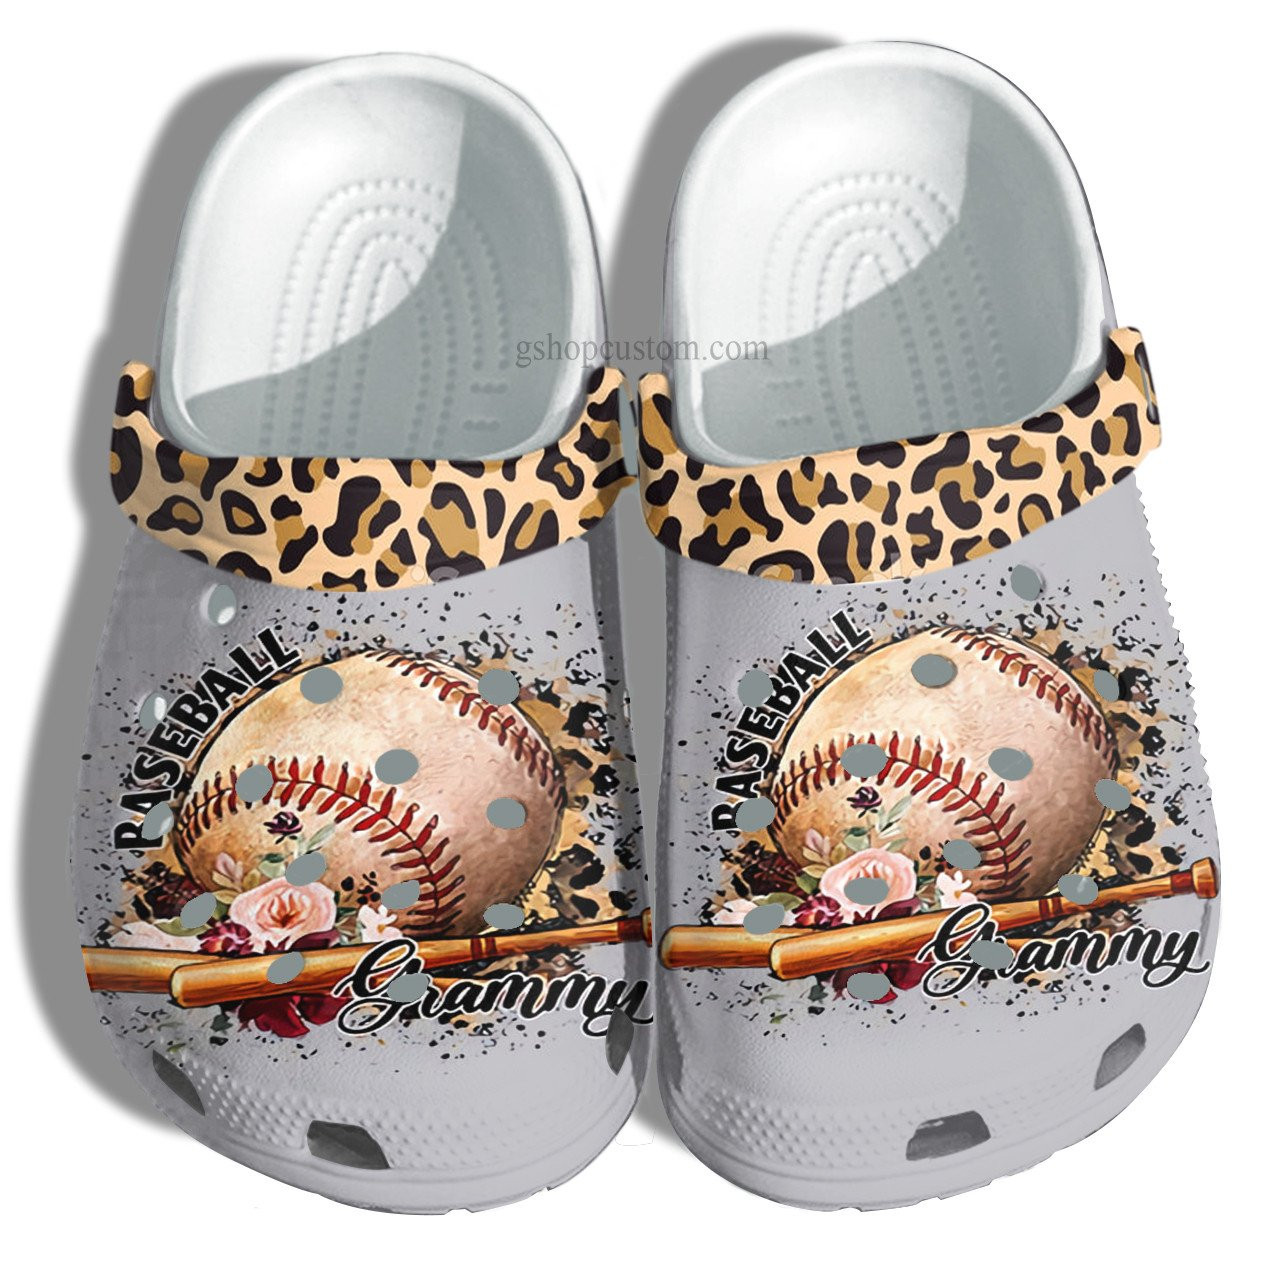 Baseball Grammy Leopard Skin Flower Crocs Shoes For Mother Day - Baseball Grandma Shoes Croc Clogs Customize Name